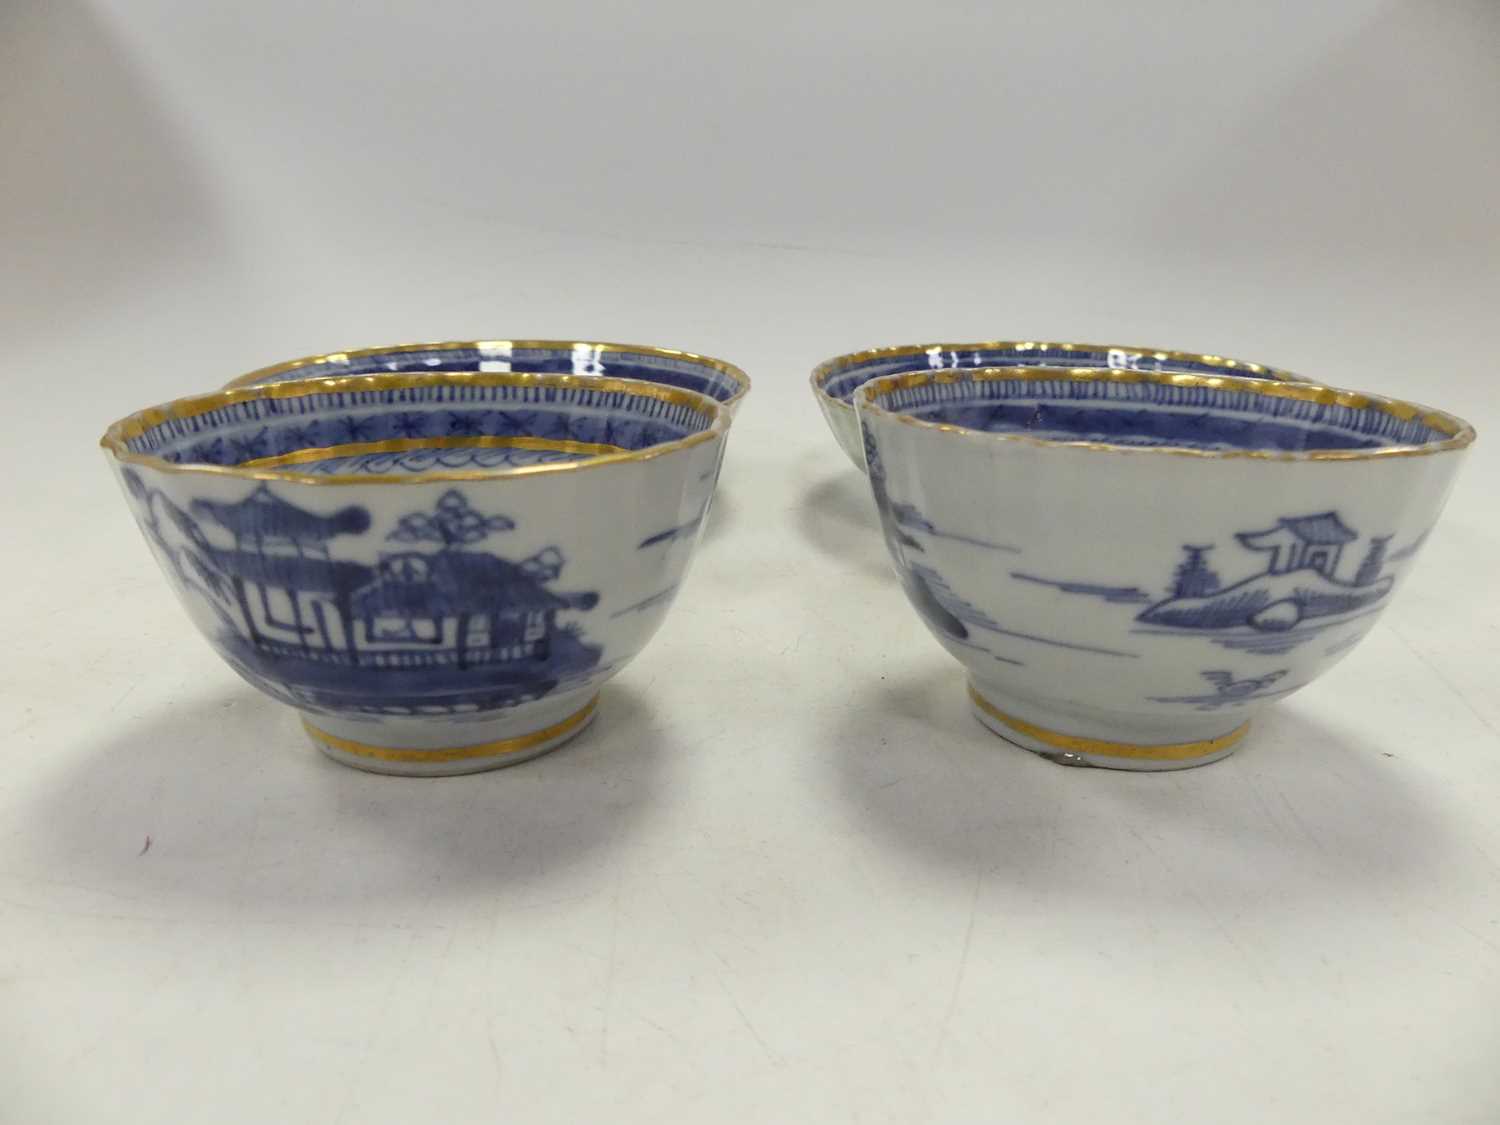 A collection of Asian ceramics, to include blue and white porcelain tea bowls Large bowl is - Image 9 of 9